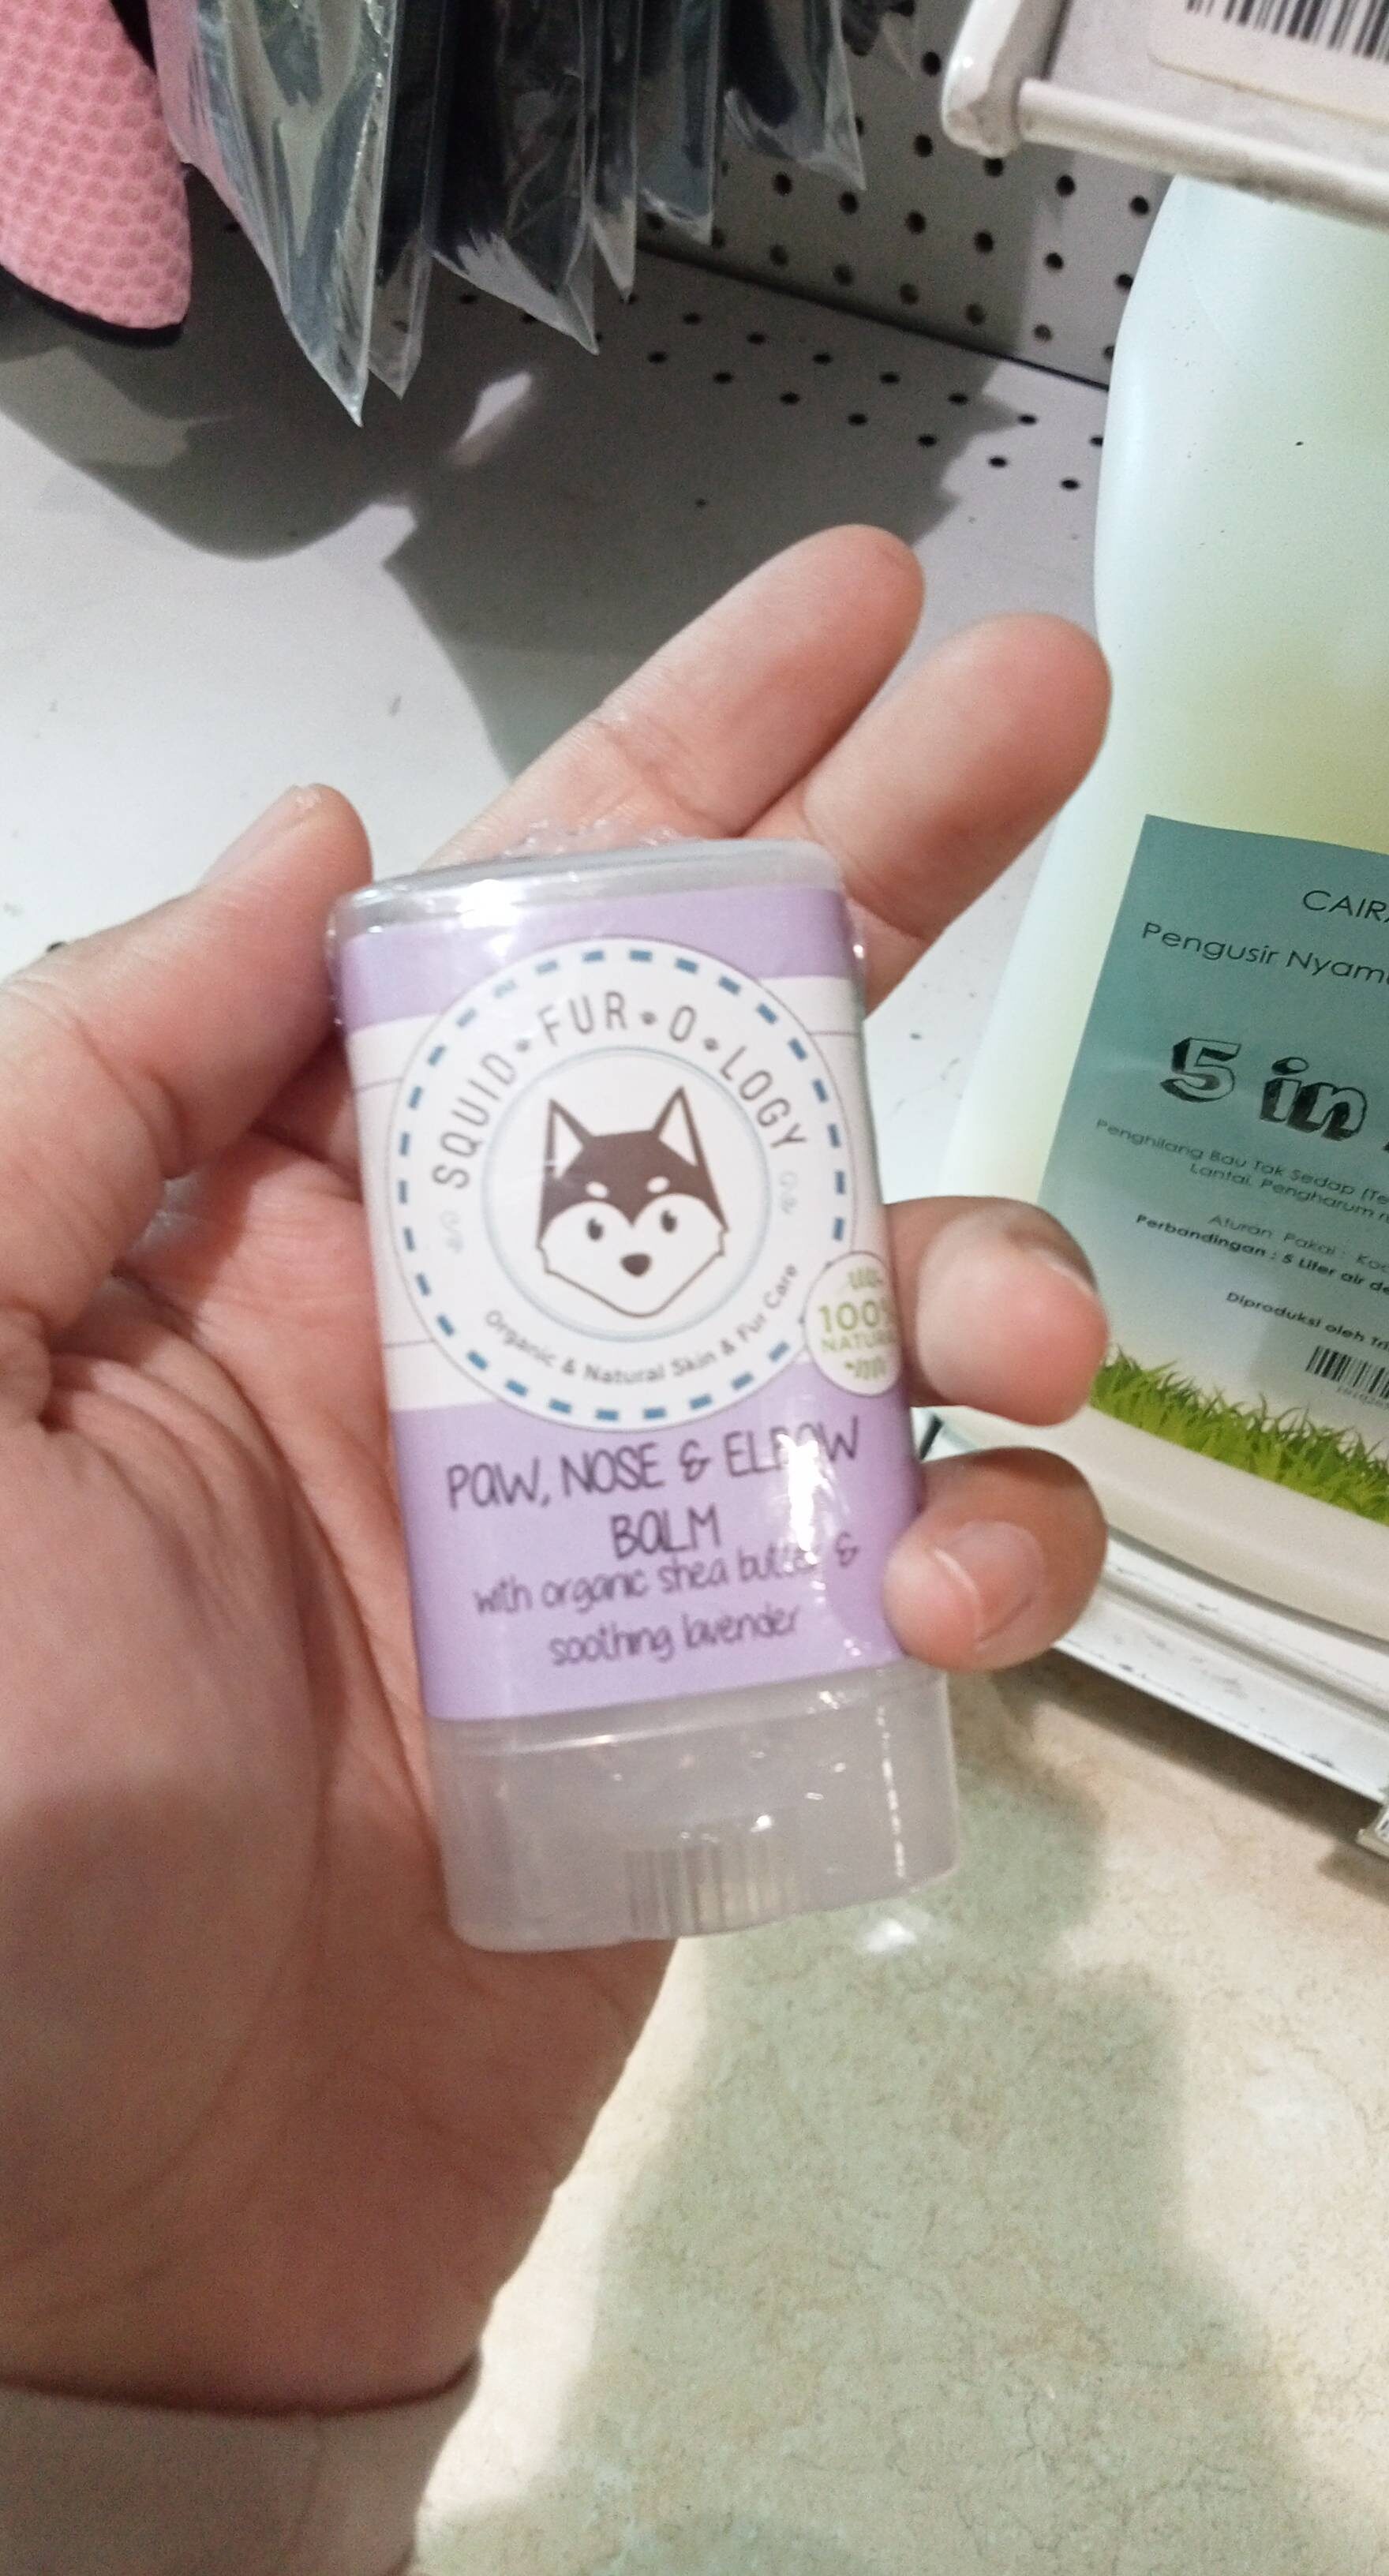 Paw and nose balm - Product - en